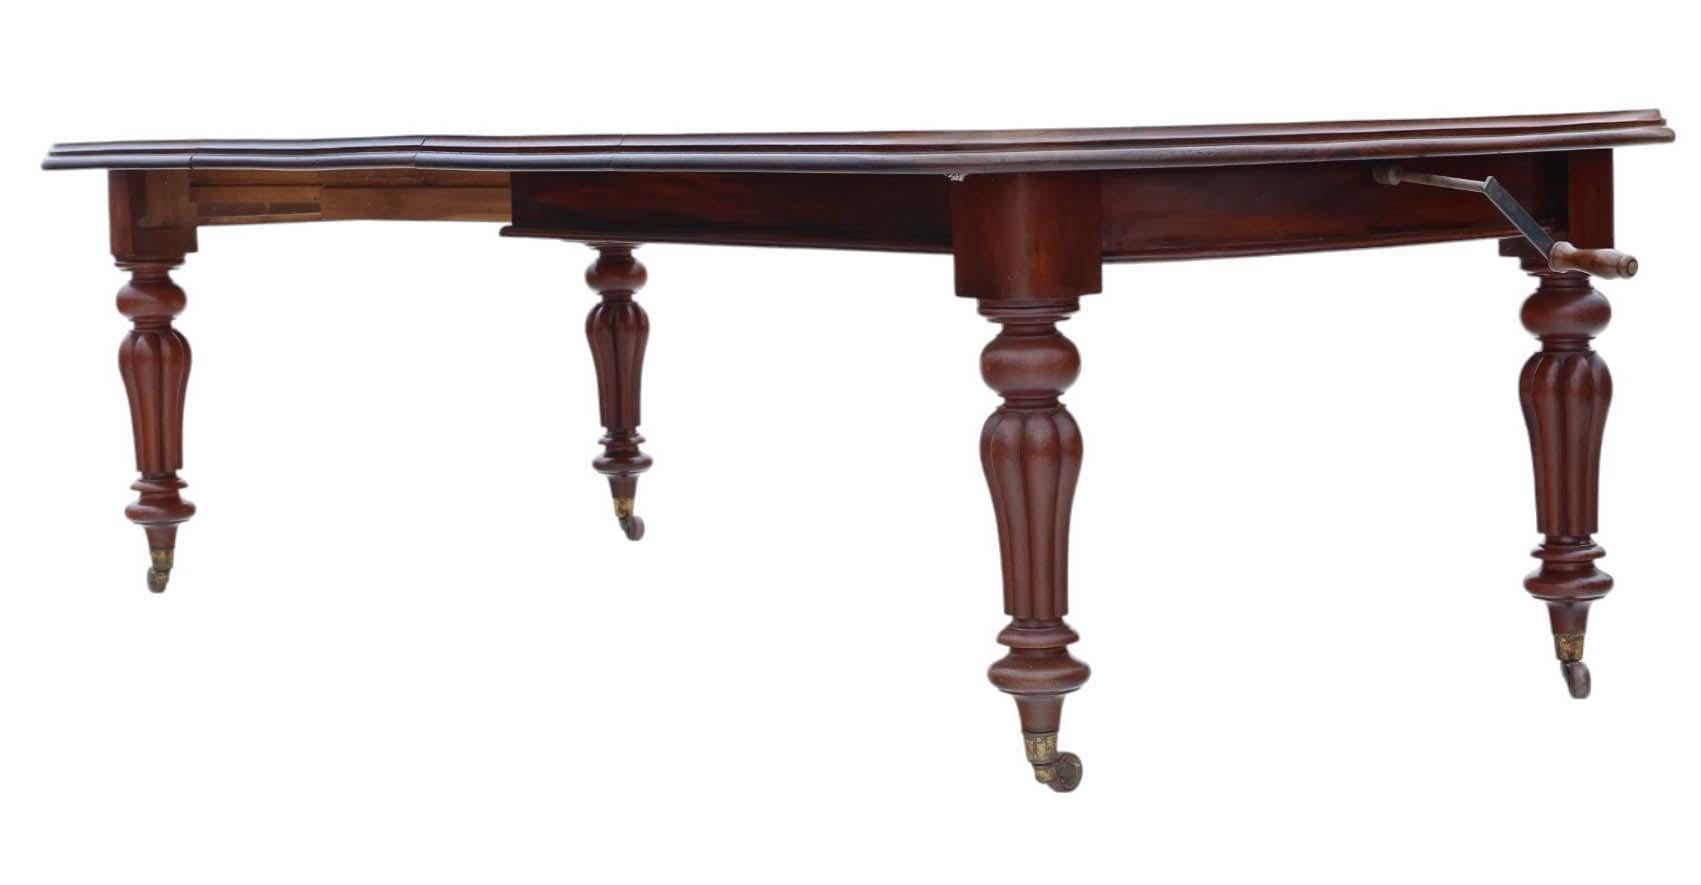 Antique Mid-19th Century Mahogany Extending Dining Table - Large, Fine Quality In Good Condition For Sale In Wisbech, Cambridgeshire